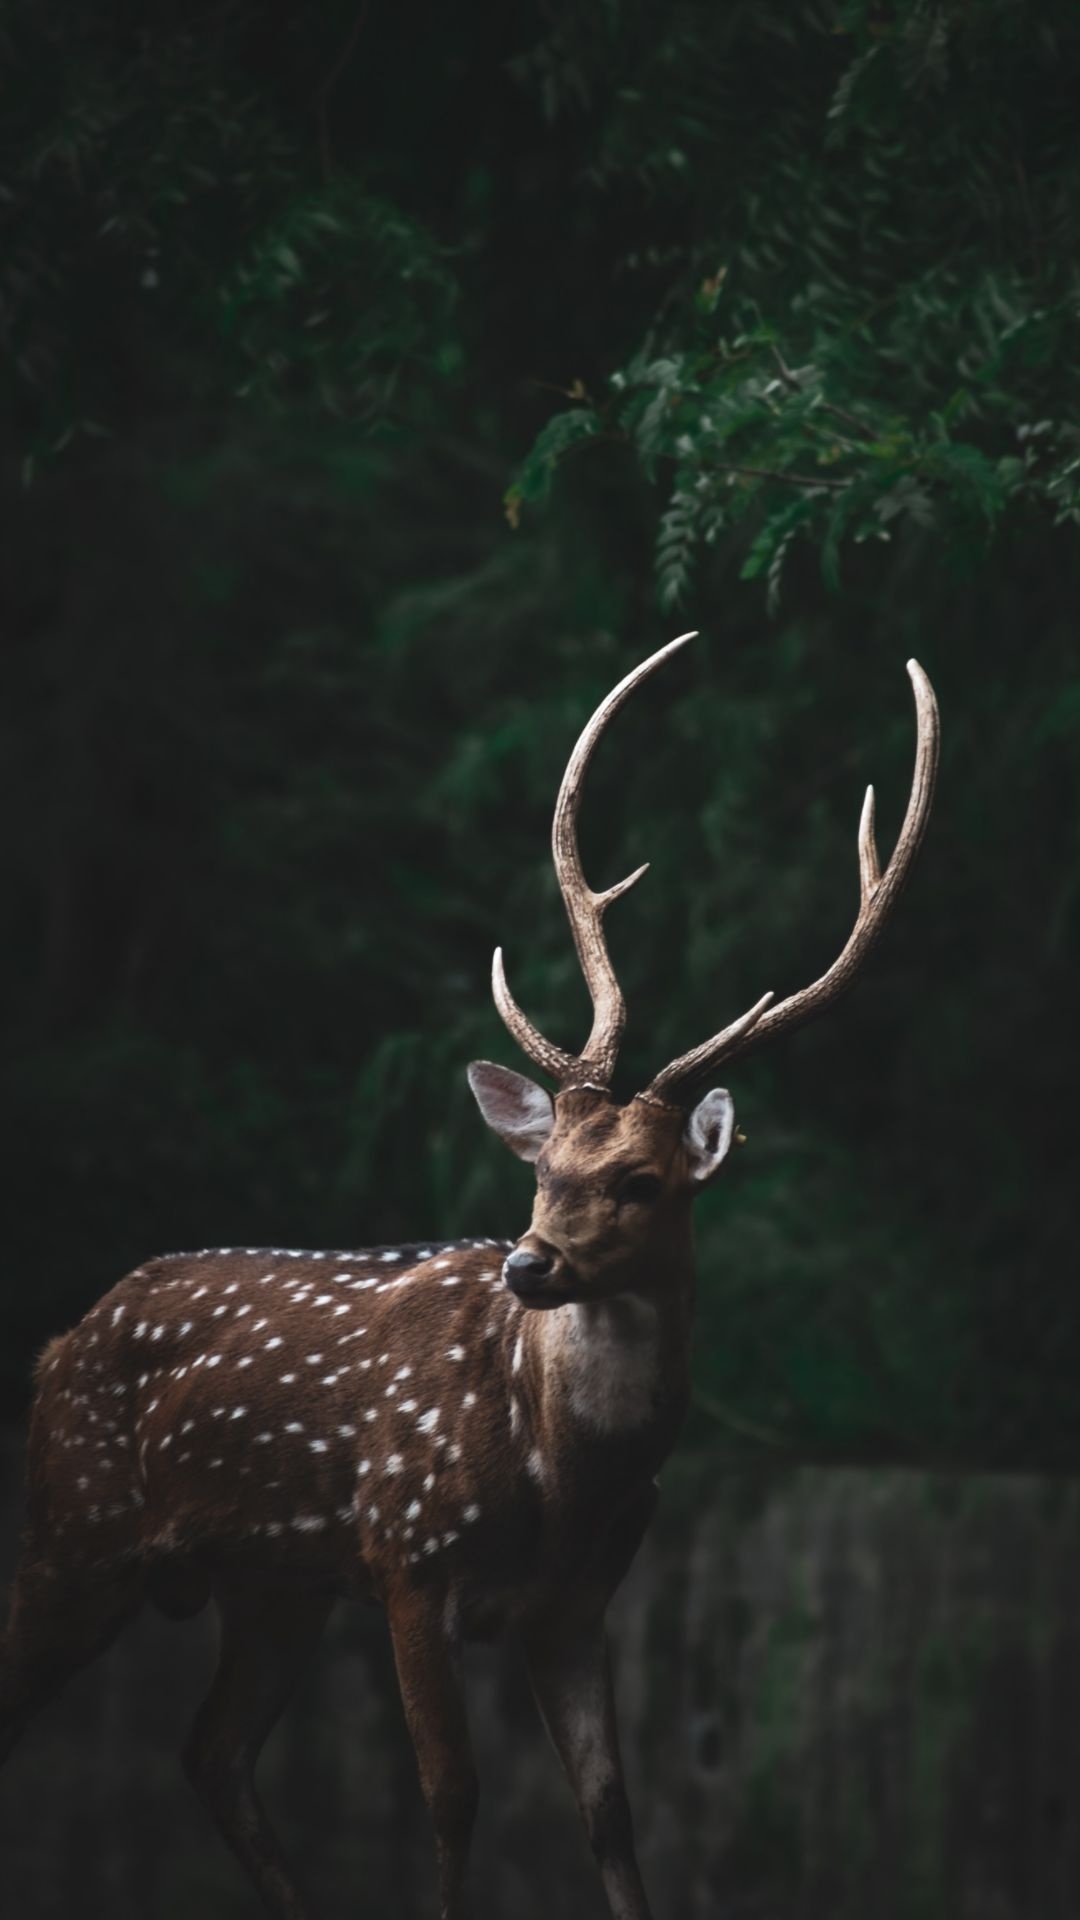 Best deer wallpapers, Breathtaking images, Nature's beauty, Majestic animals, 1080x1920 Full HD Handy